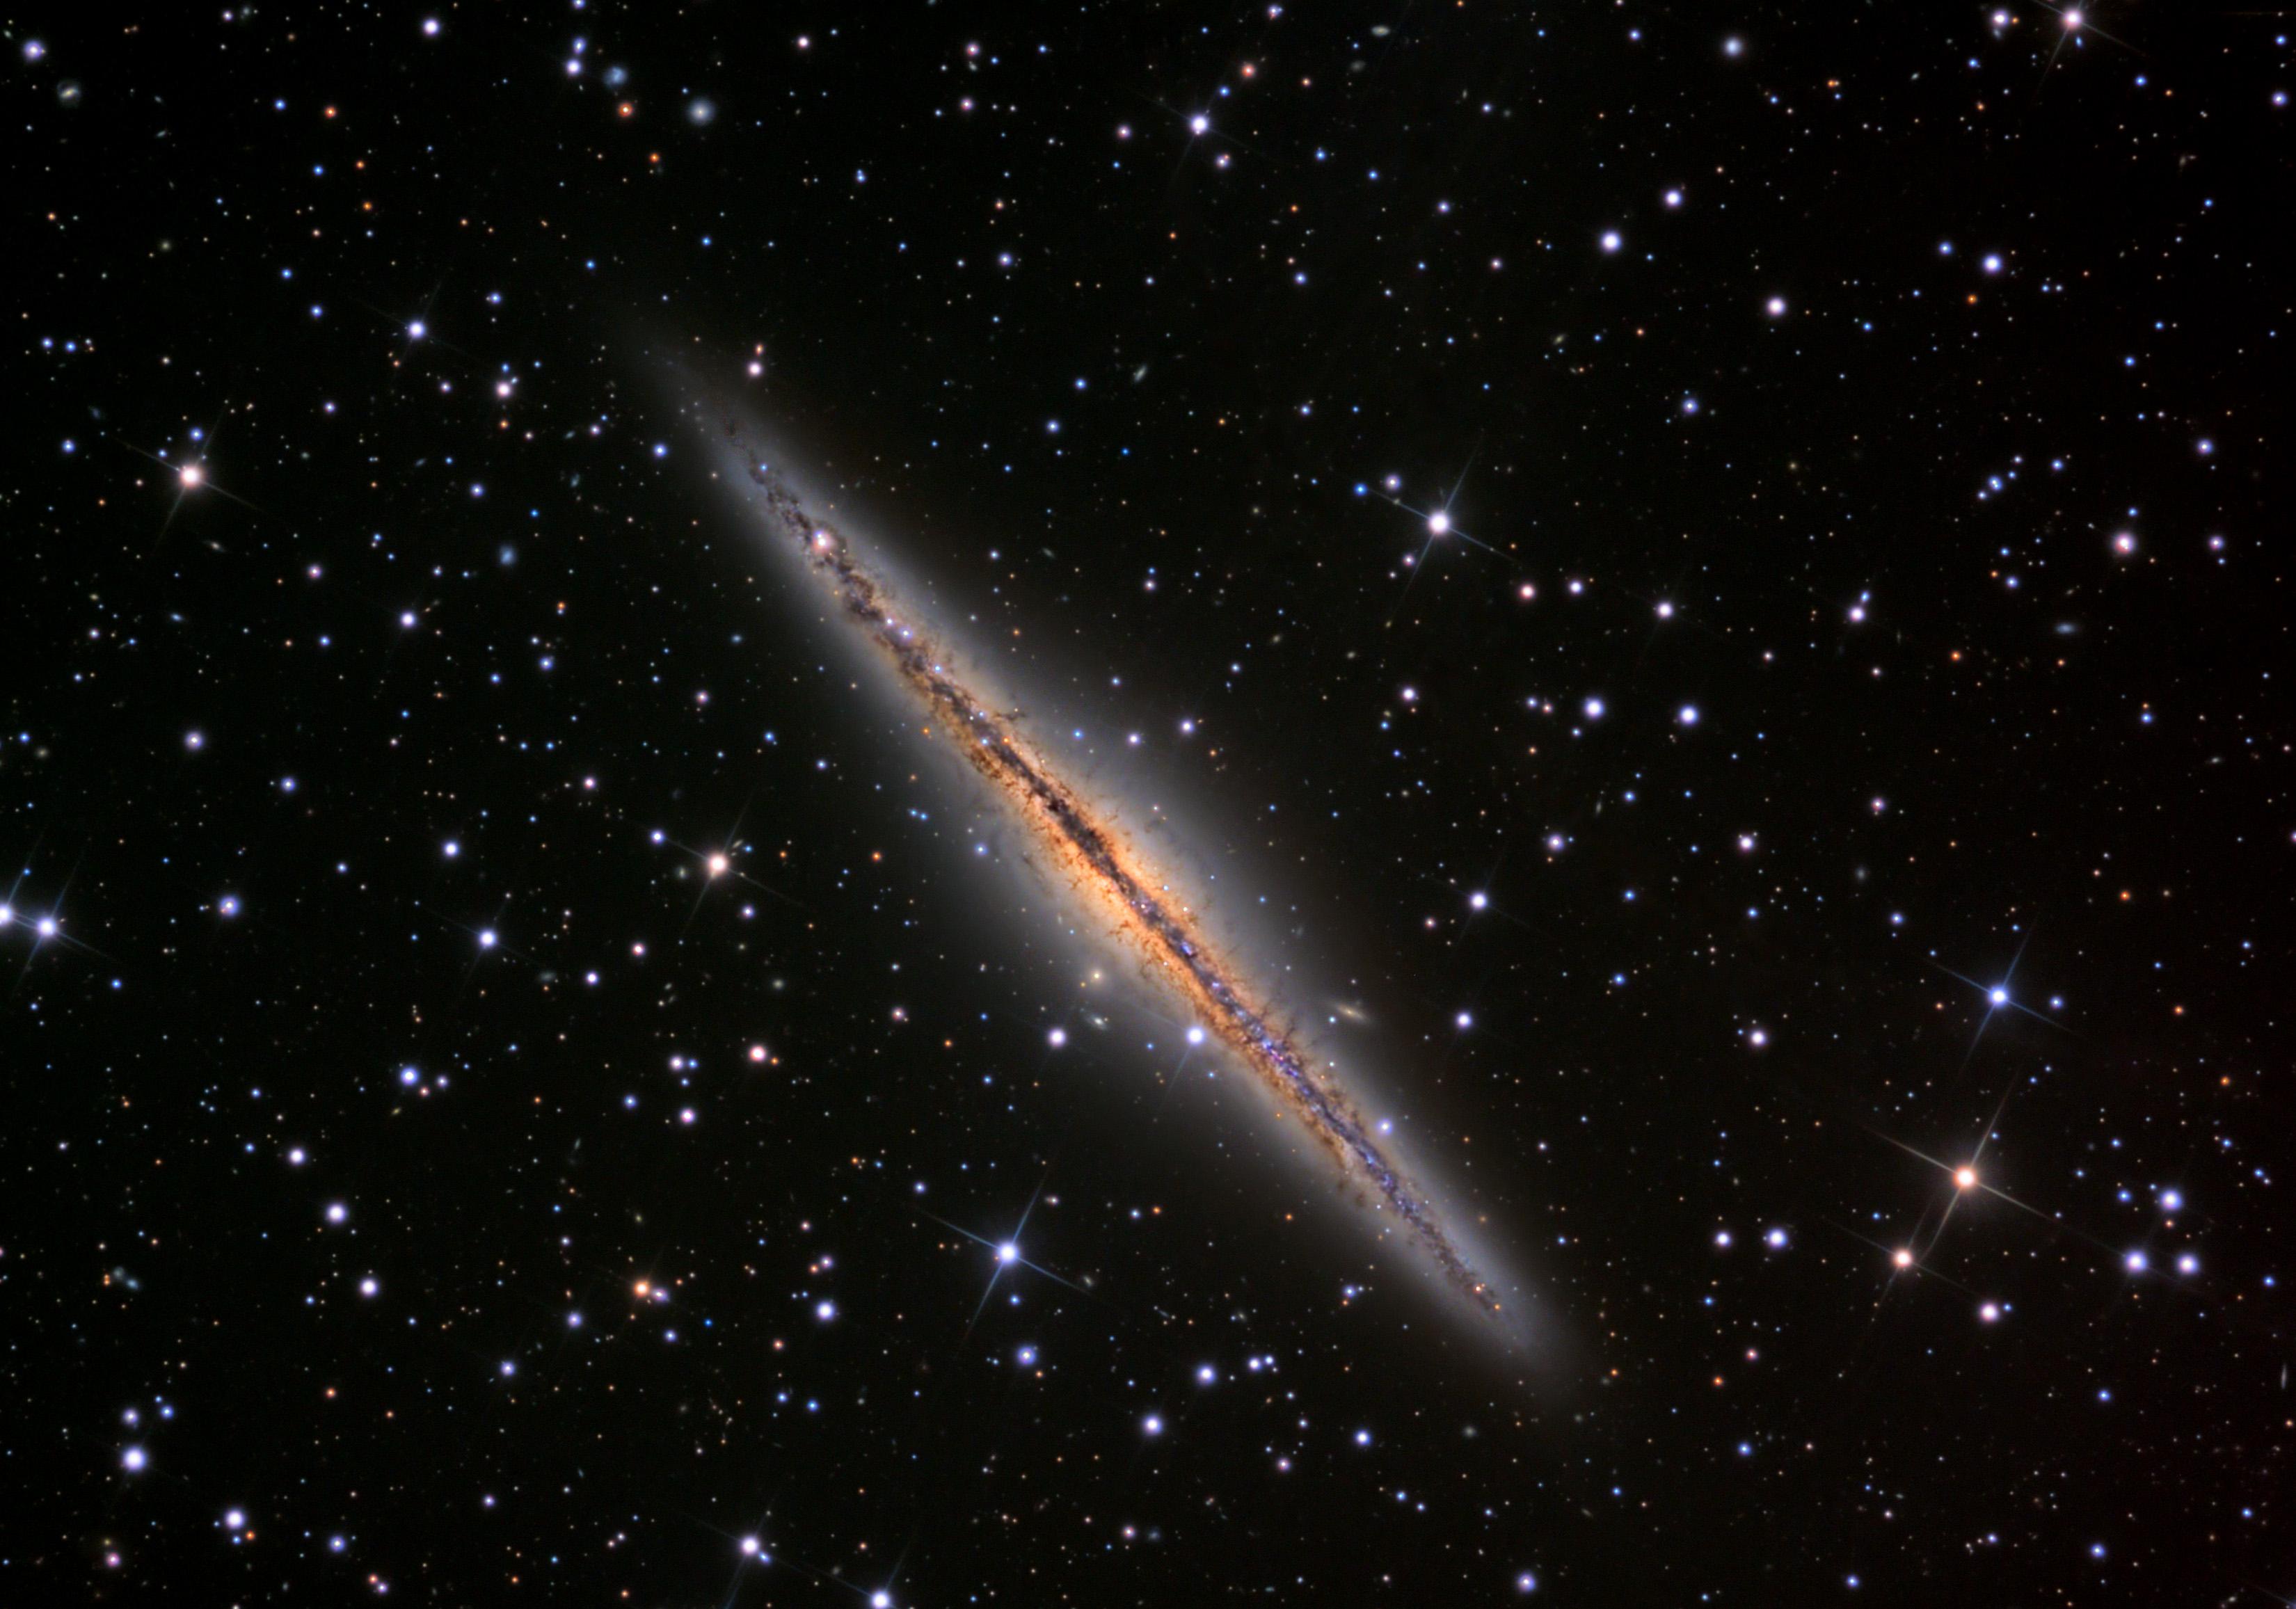 http://www.rcopticalsystems.com/gallery/images/ngc891.jpg